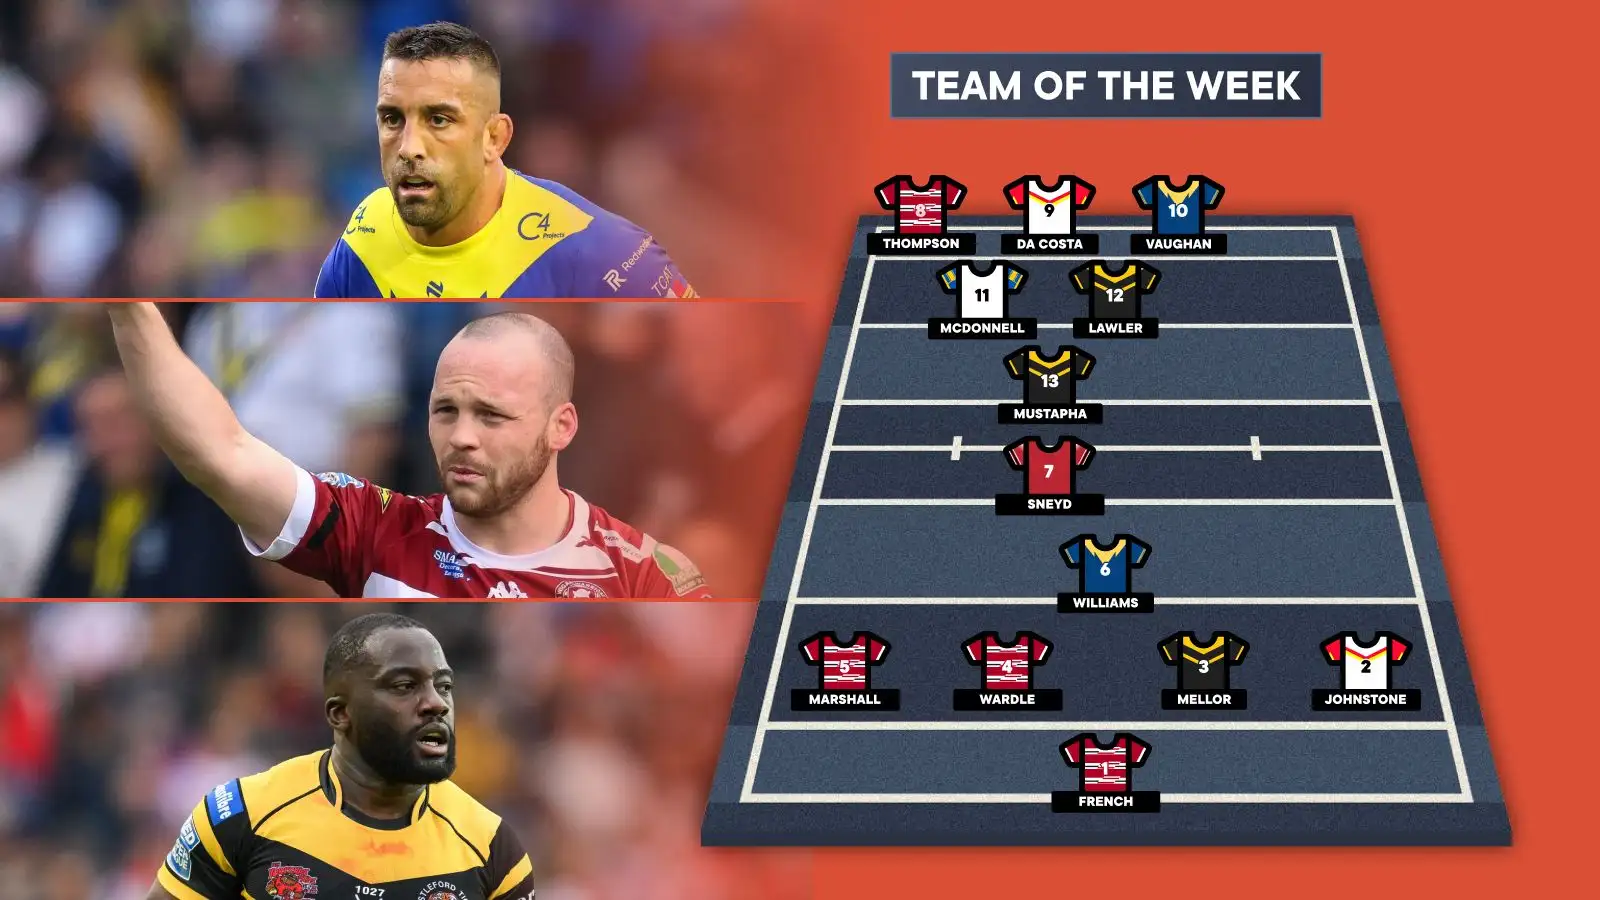 Wigan Warriors, Castleford Tigers provide 7 players in Super League Team of the Week